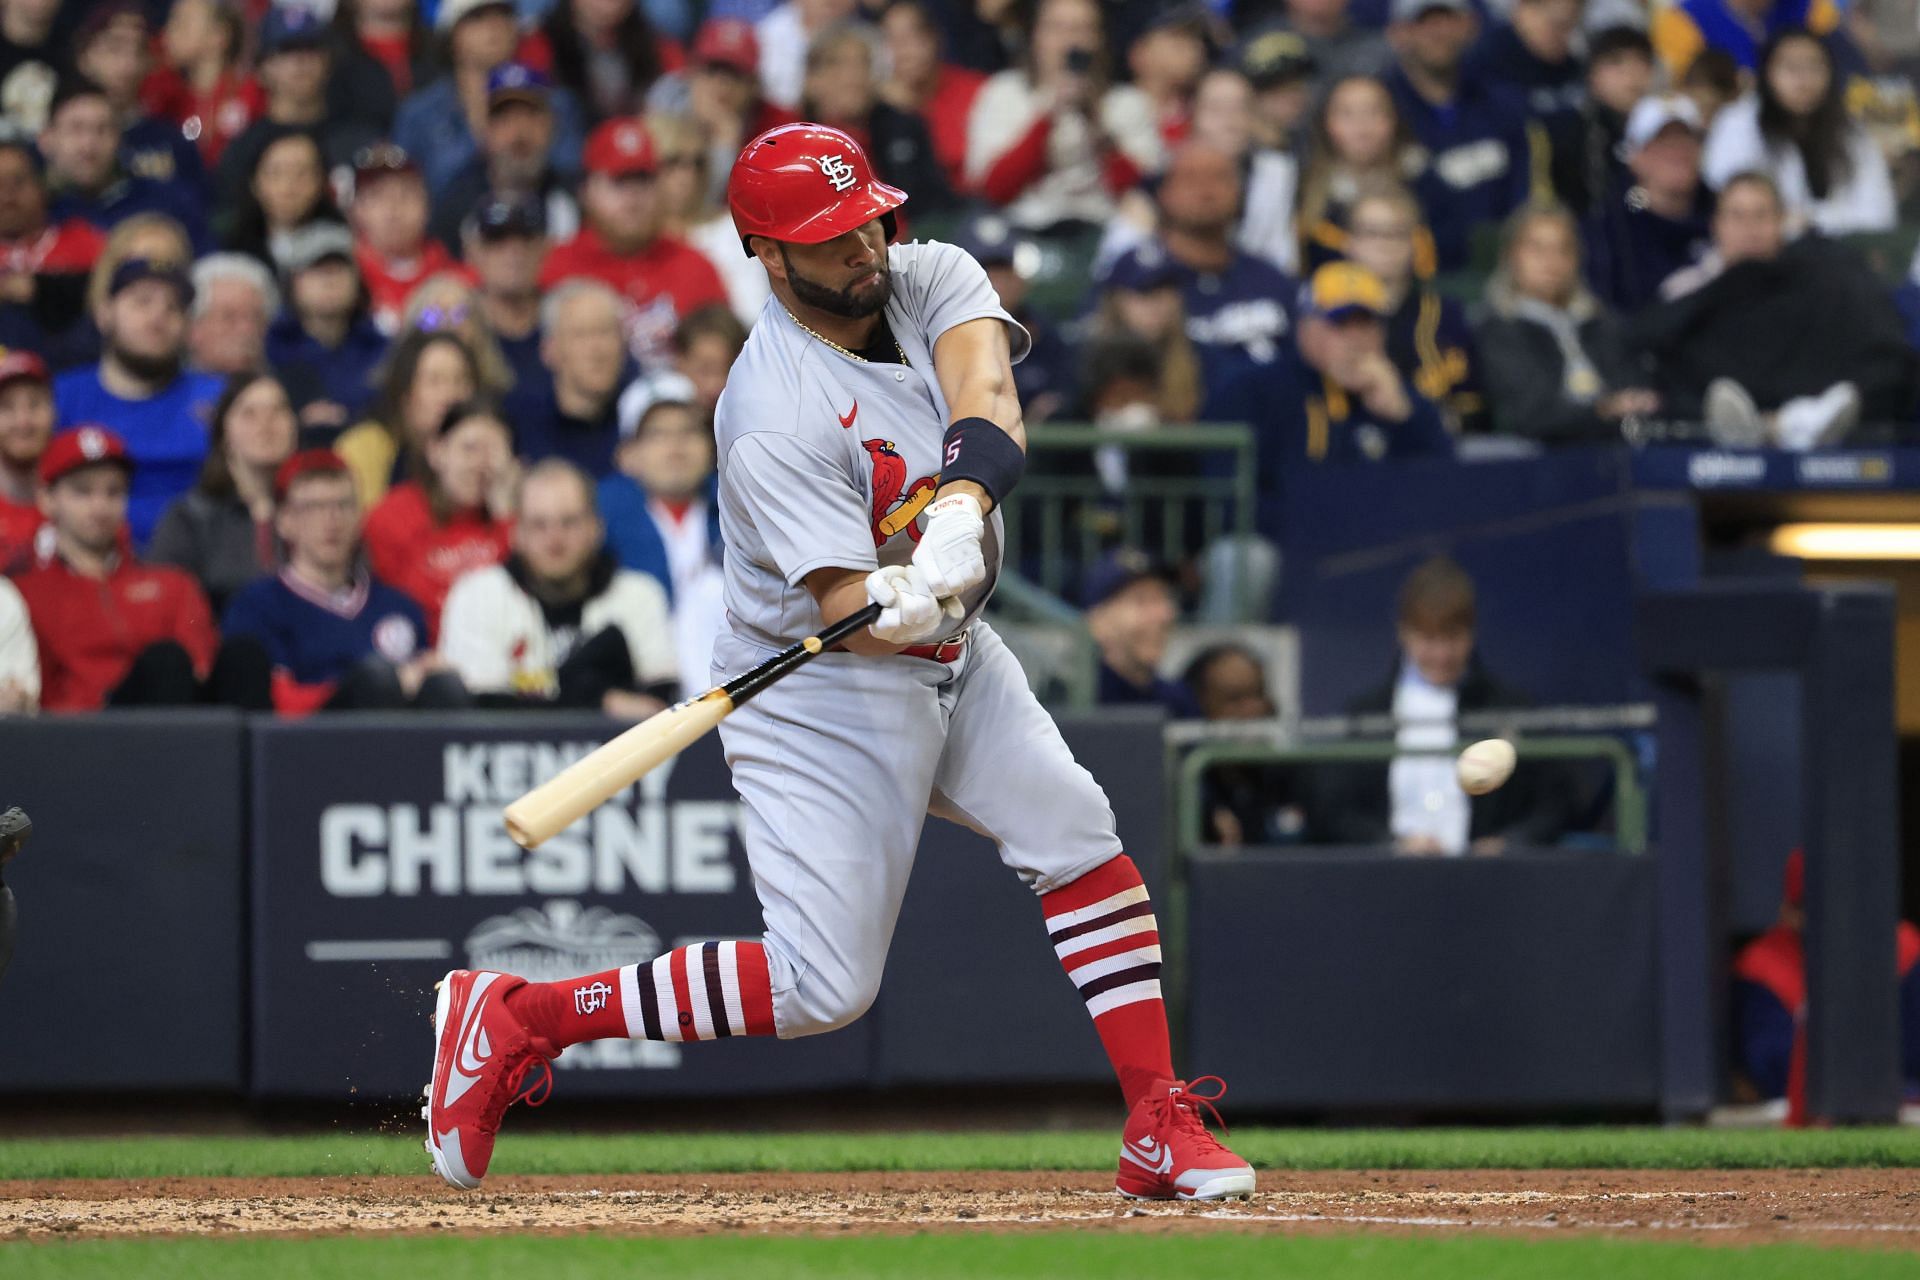 Albert Pujols of the St. Louis Cardinals bats against the Milwaukee Brewers at American Family Field.